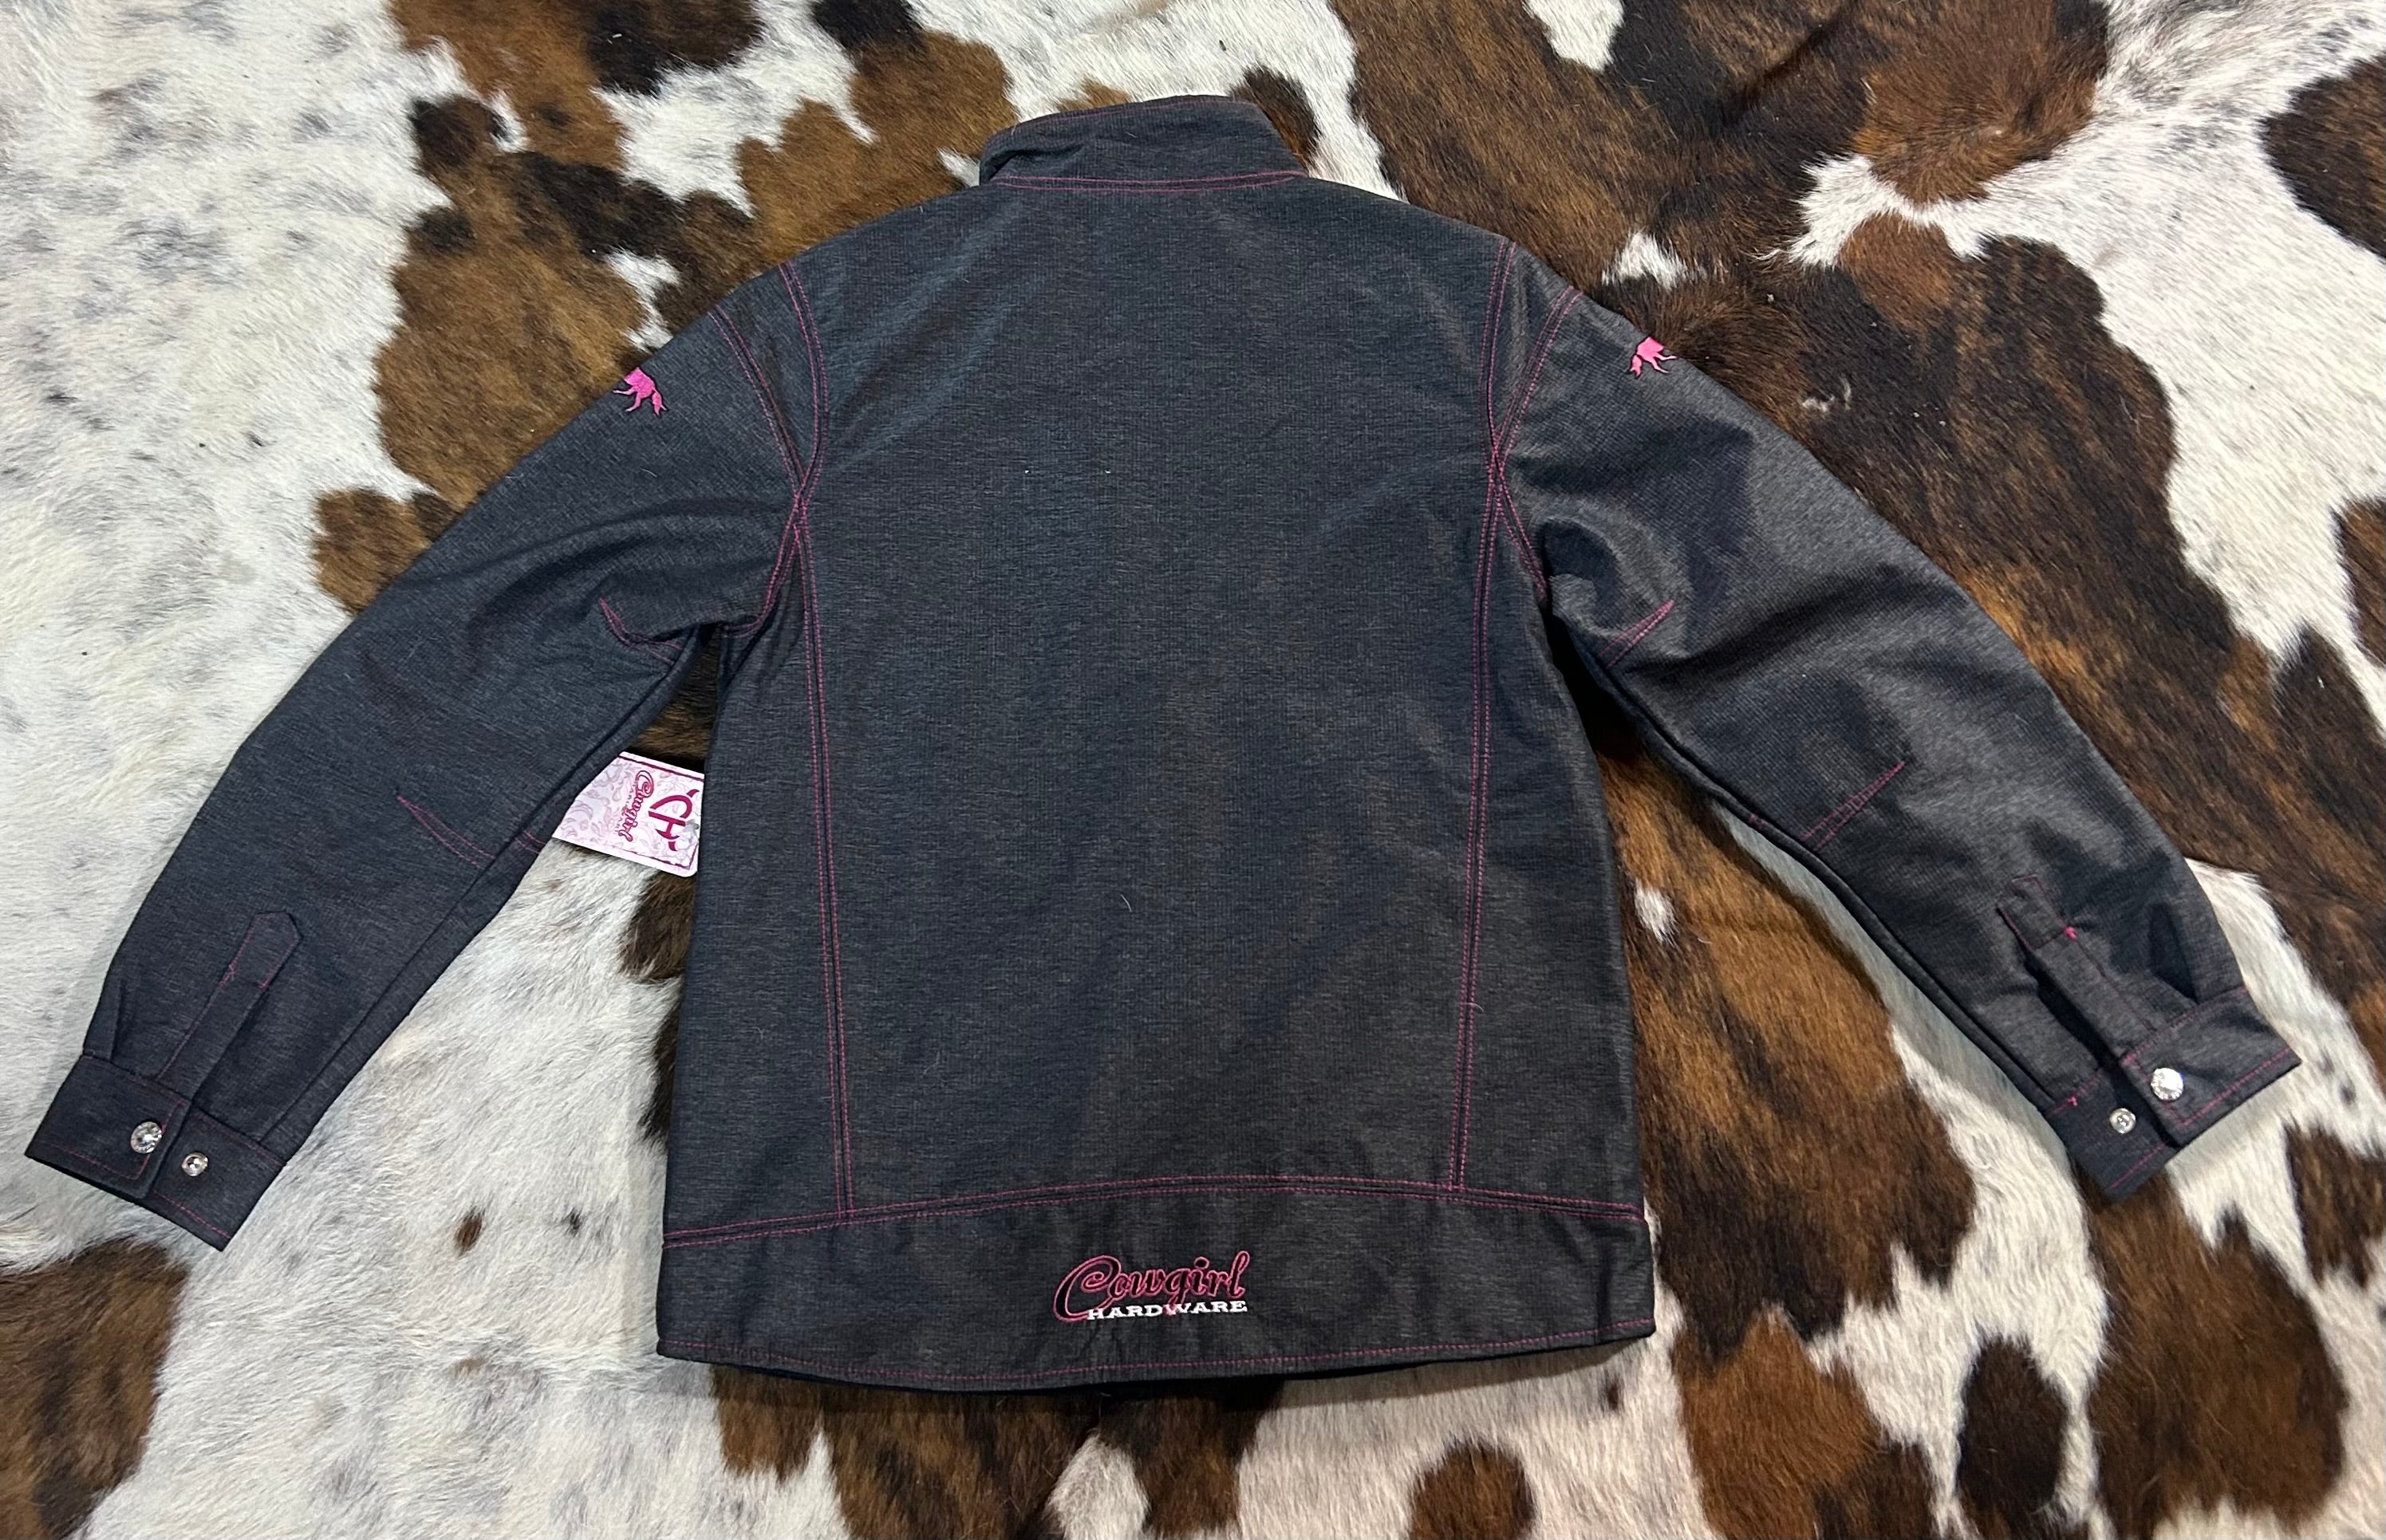 Cowgirl Hardware Girls Black and Pink Shell Jacket